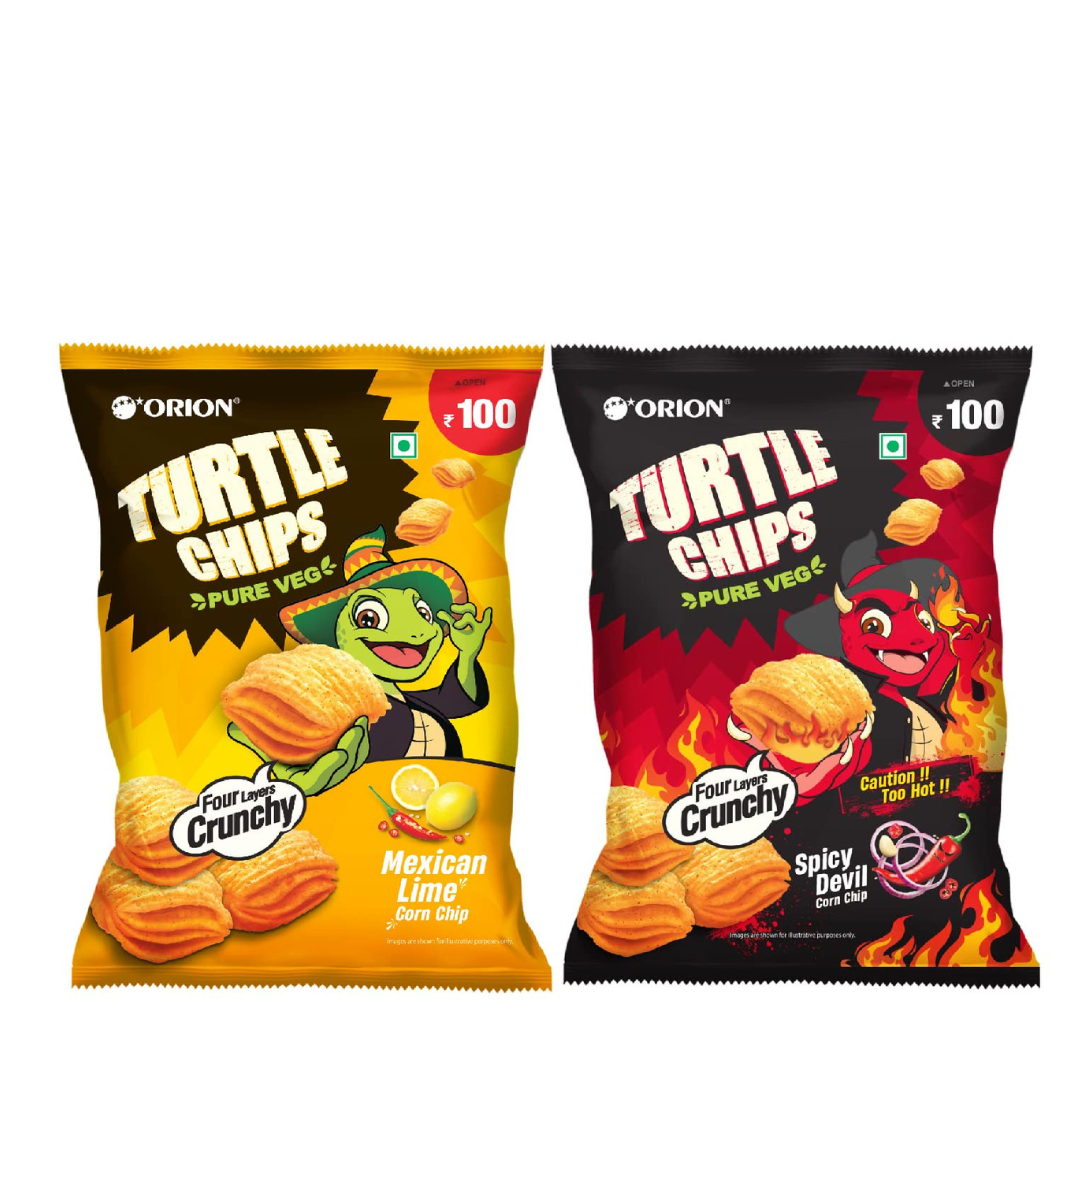 Orion Turtle Chips Party Pack (Pack of 2) - Mexican Lime & Spicy Devil Flavors|100% Veg|Korean Snacks - 115 gm (Pack of 2)